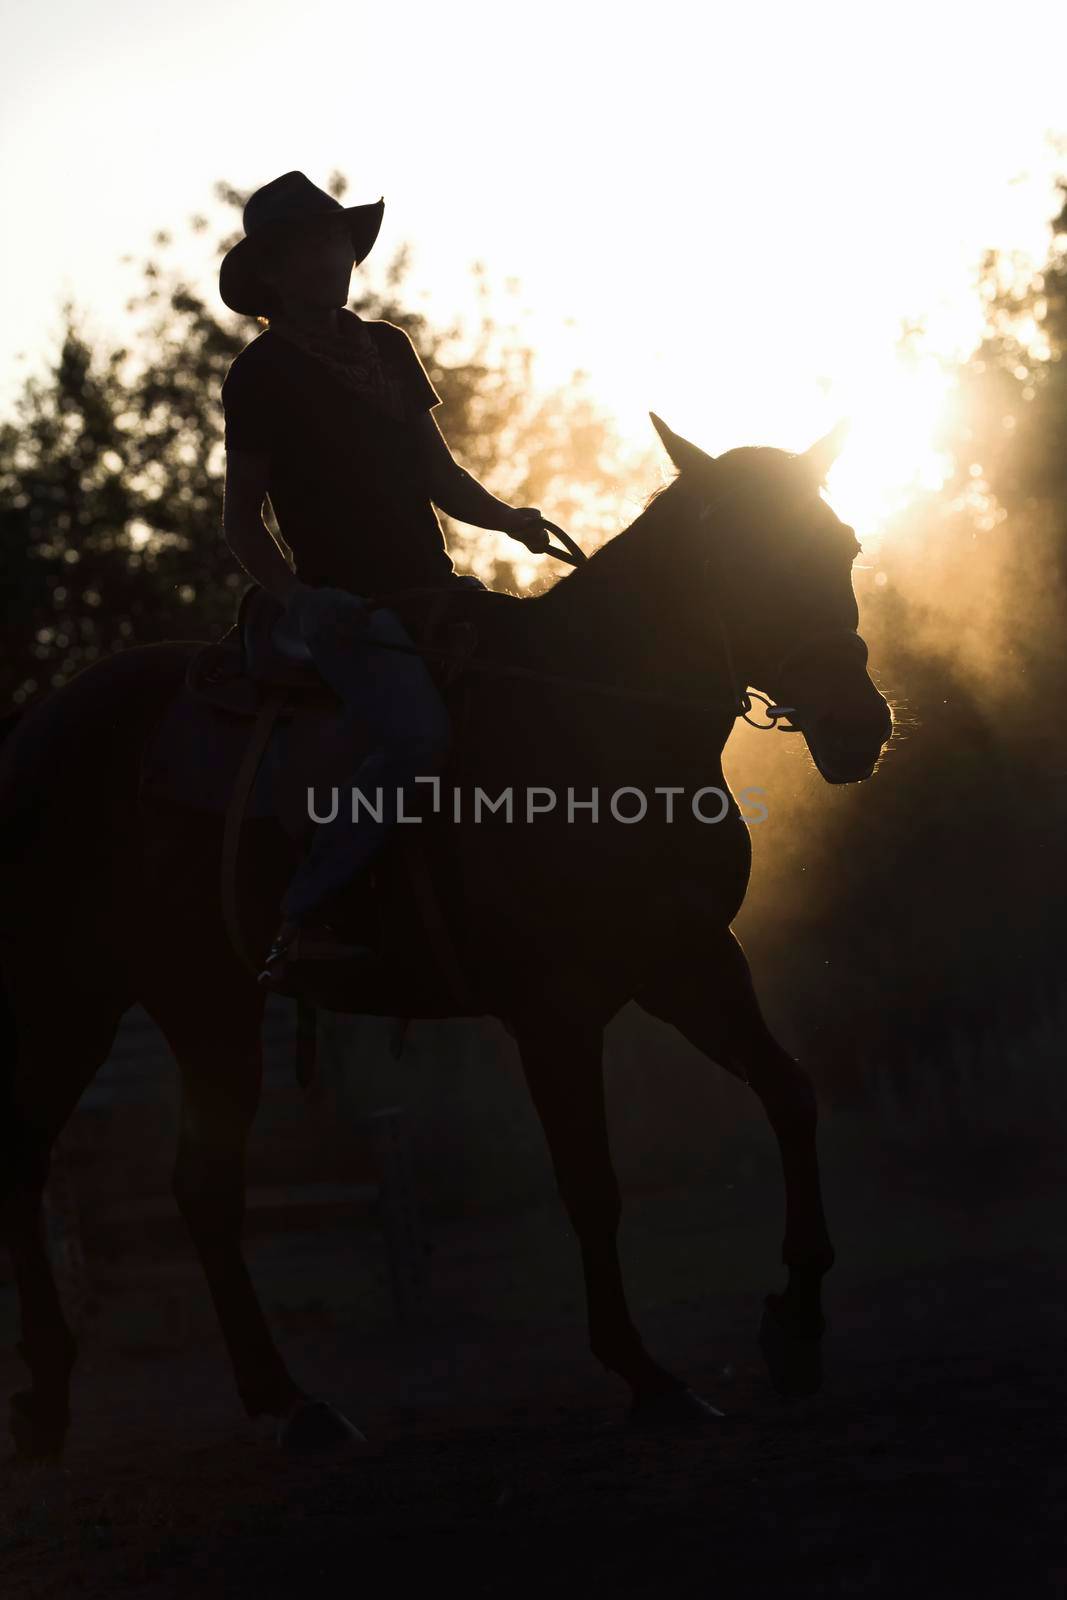 Silhouette of a woman riding a horse - sunset or sunrise, telephoto